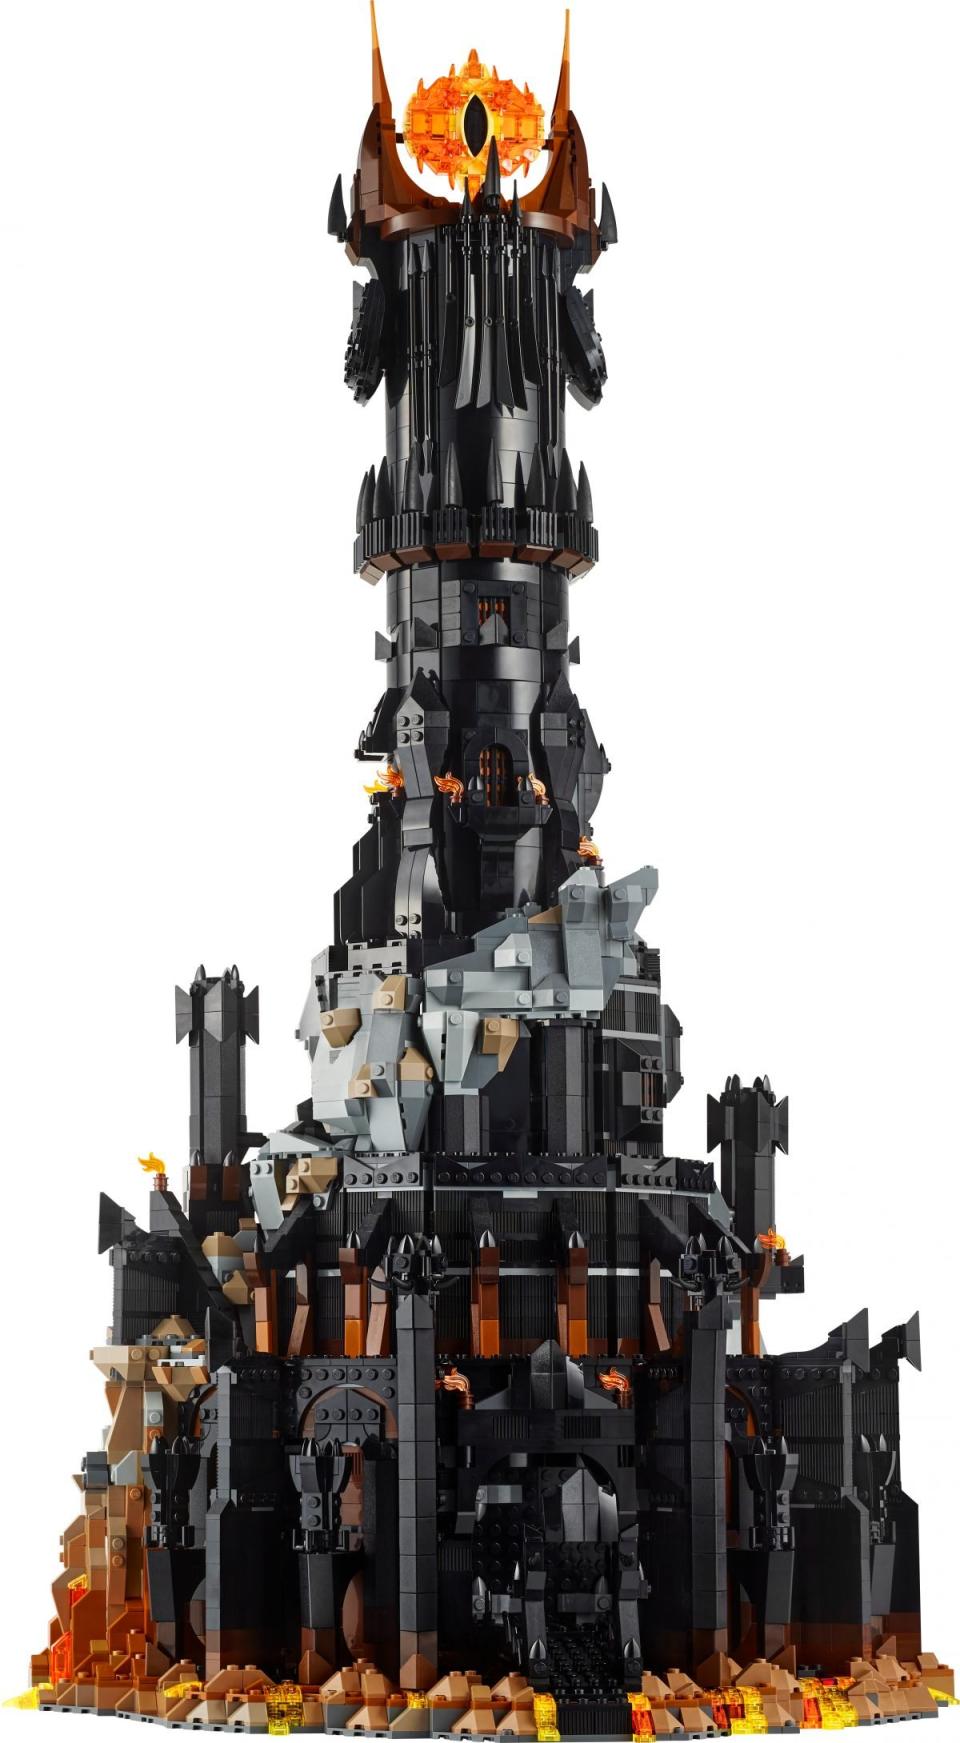 The Lord of the Rings Barad-Dûr LEGO set